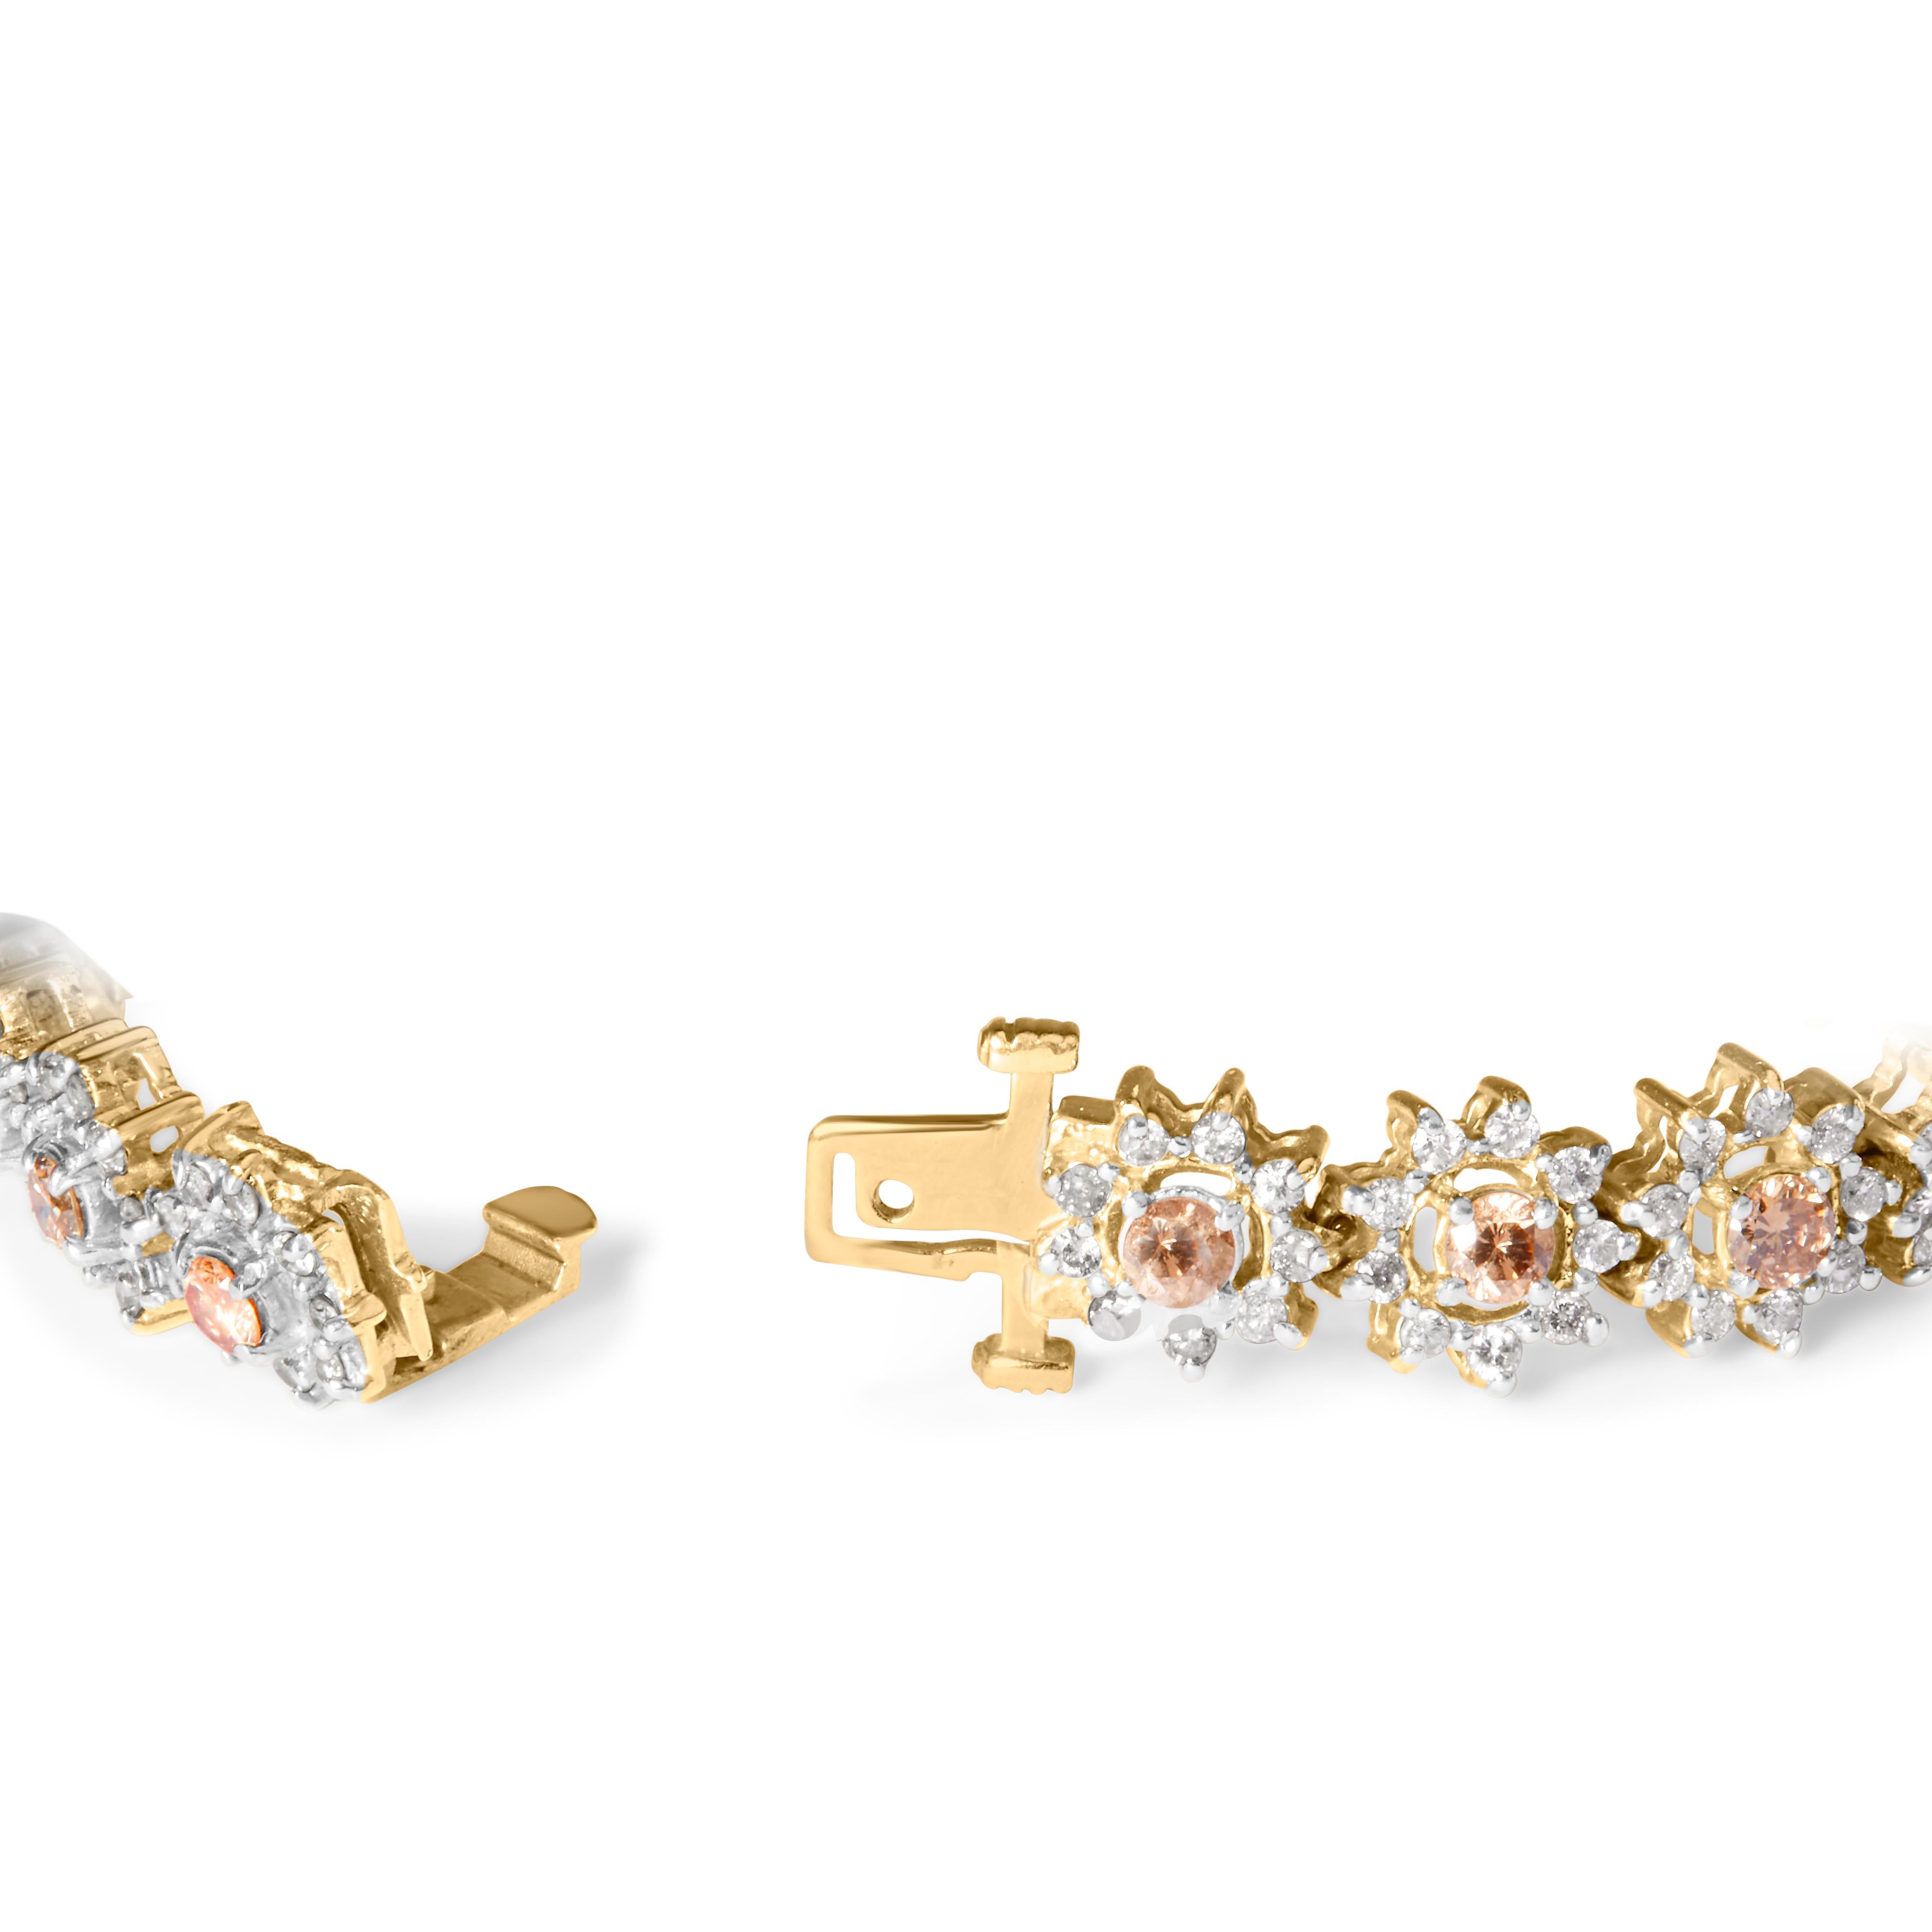 Introducing a mesmerizing masterpiece that will adorn your wrist with unparalleled elegance. This 14K Yellow Gold Bracelet showcases a captivating floral cluster design, meticulously crafted with 190 round champagne diamonds. With a total weight of